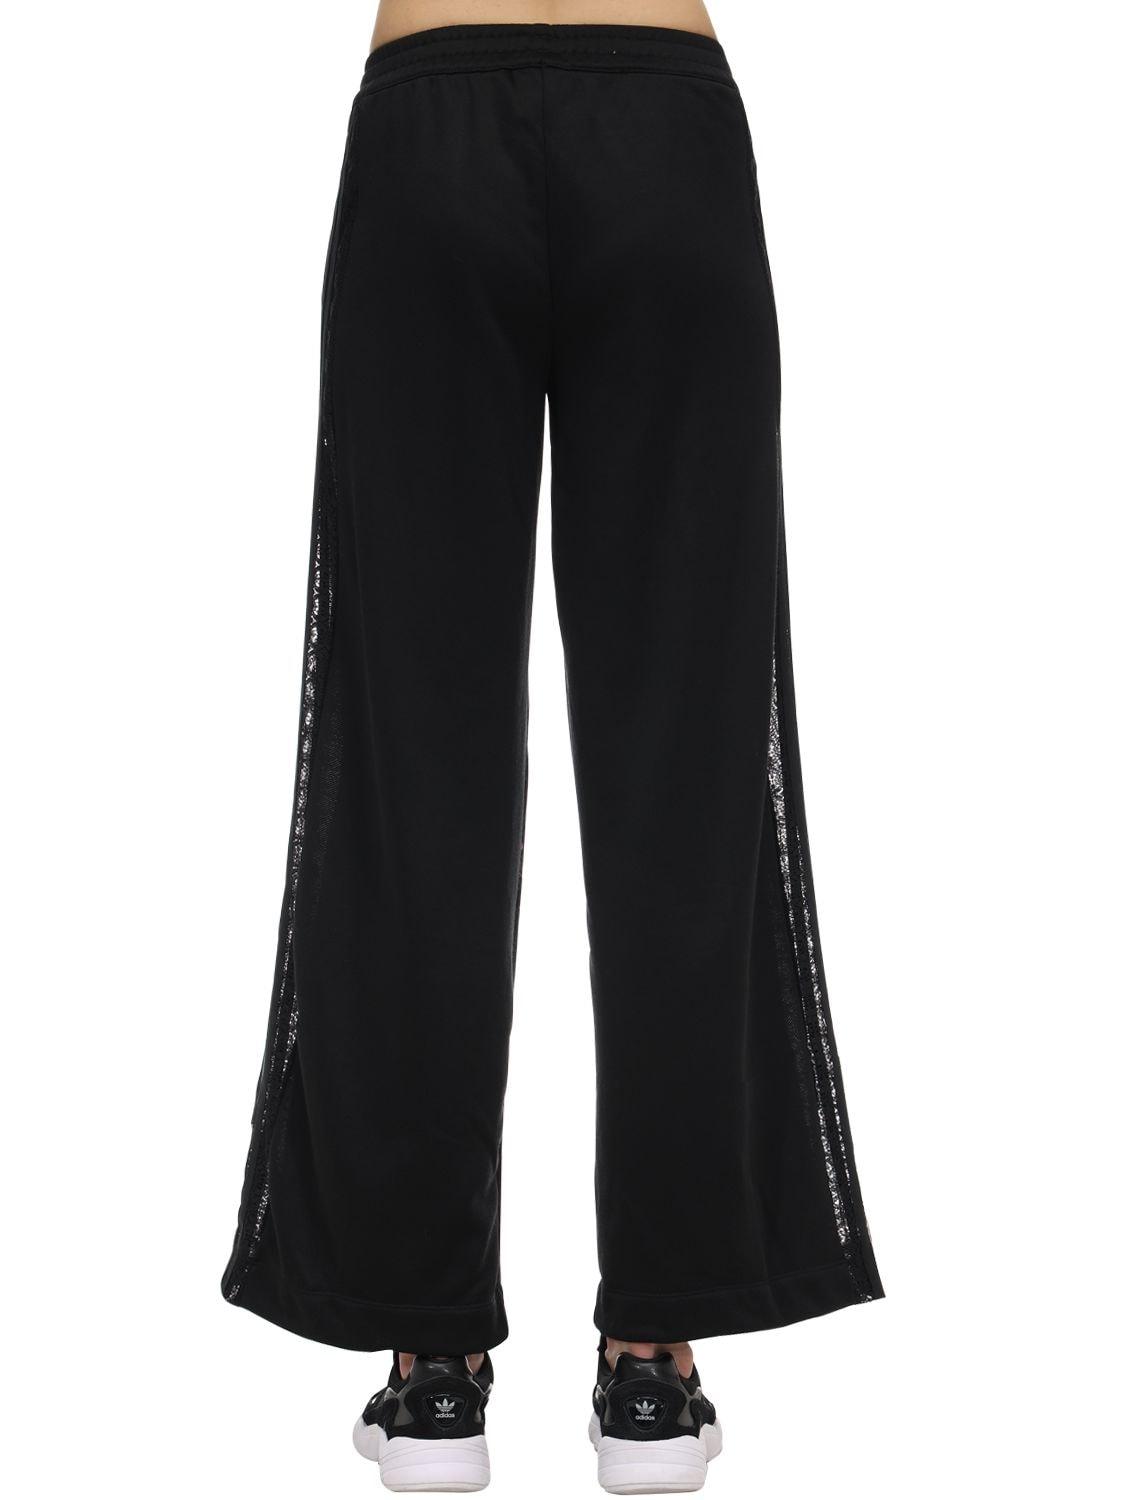 adidas Originals Wide Leg Pants W/ Lace Side Bands in Black | Lyst